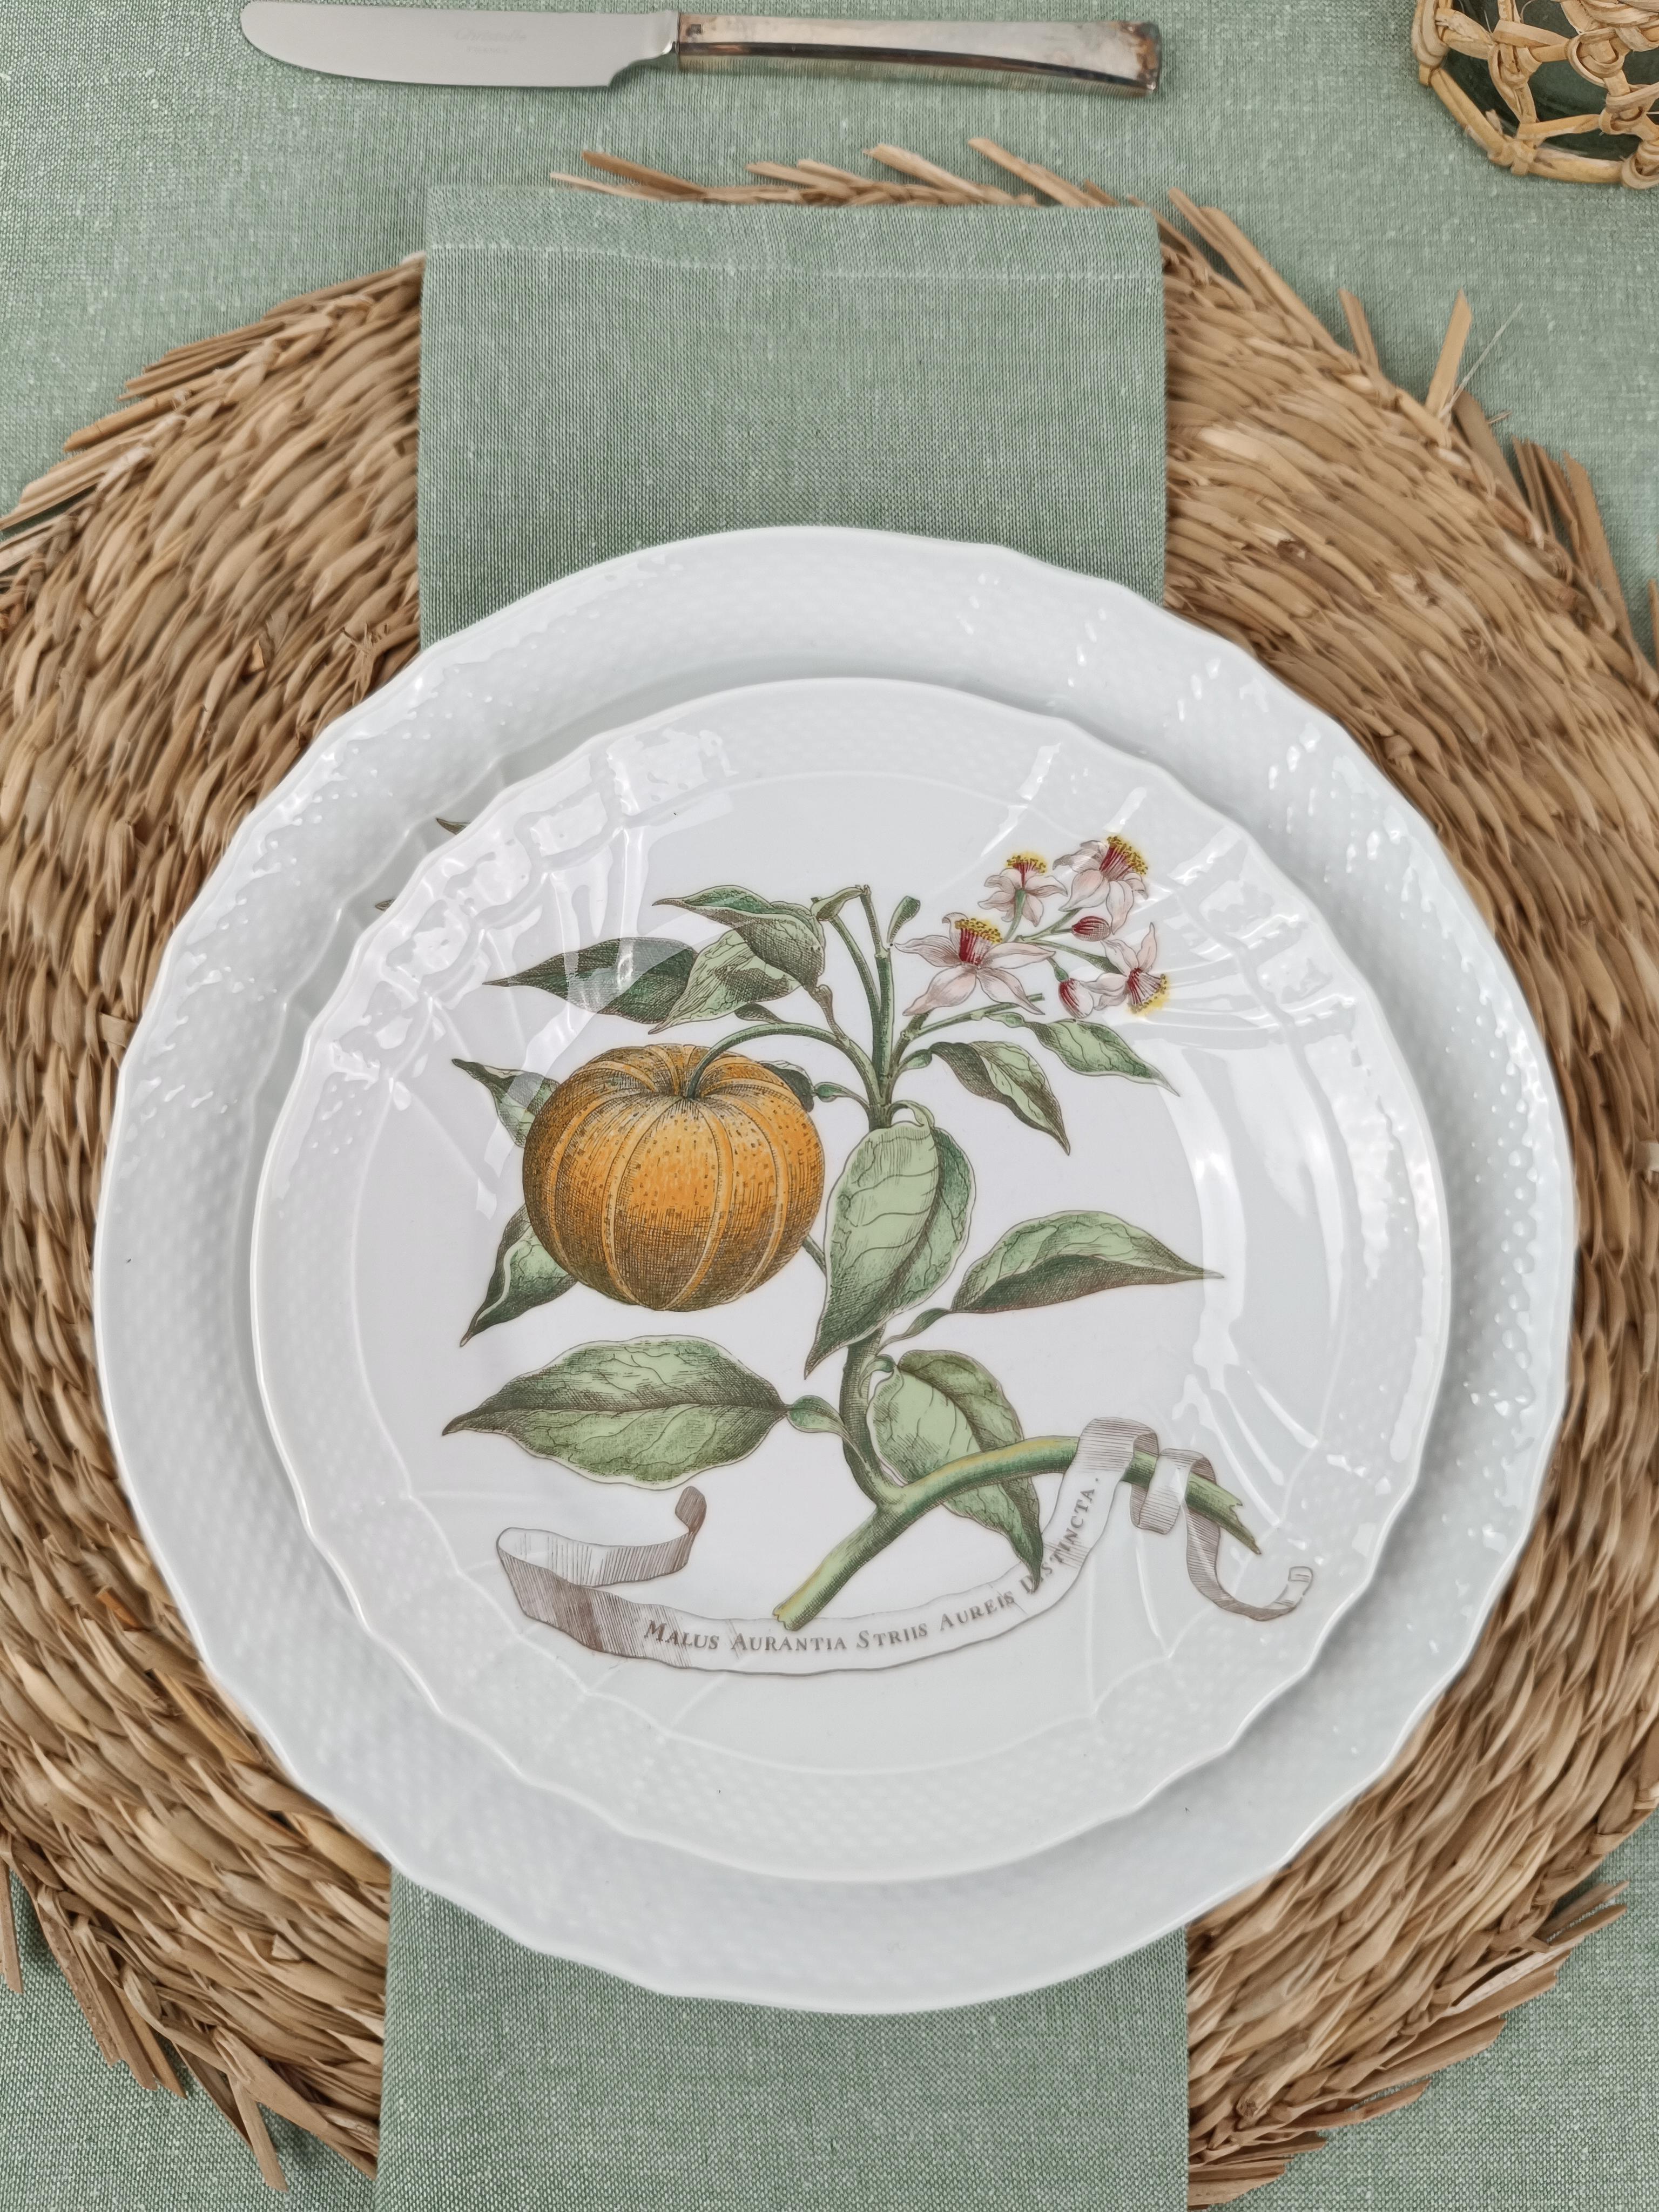 Richard Ginori China Dinner Service with a botanical print by Munting Abraham For Sale 4